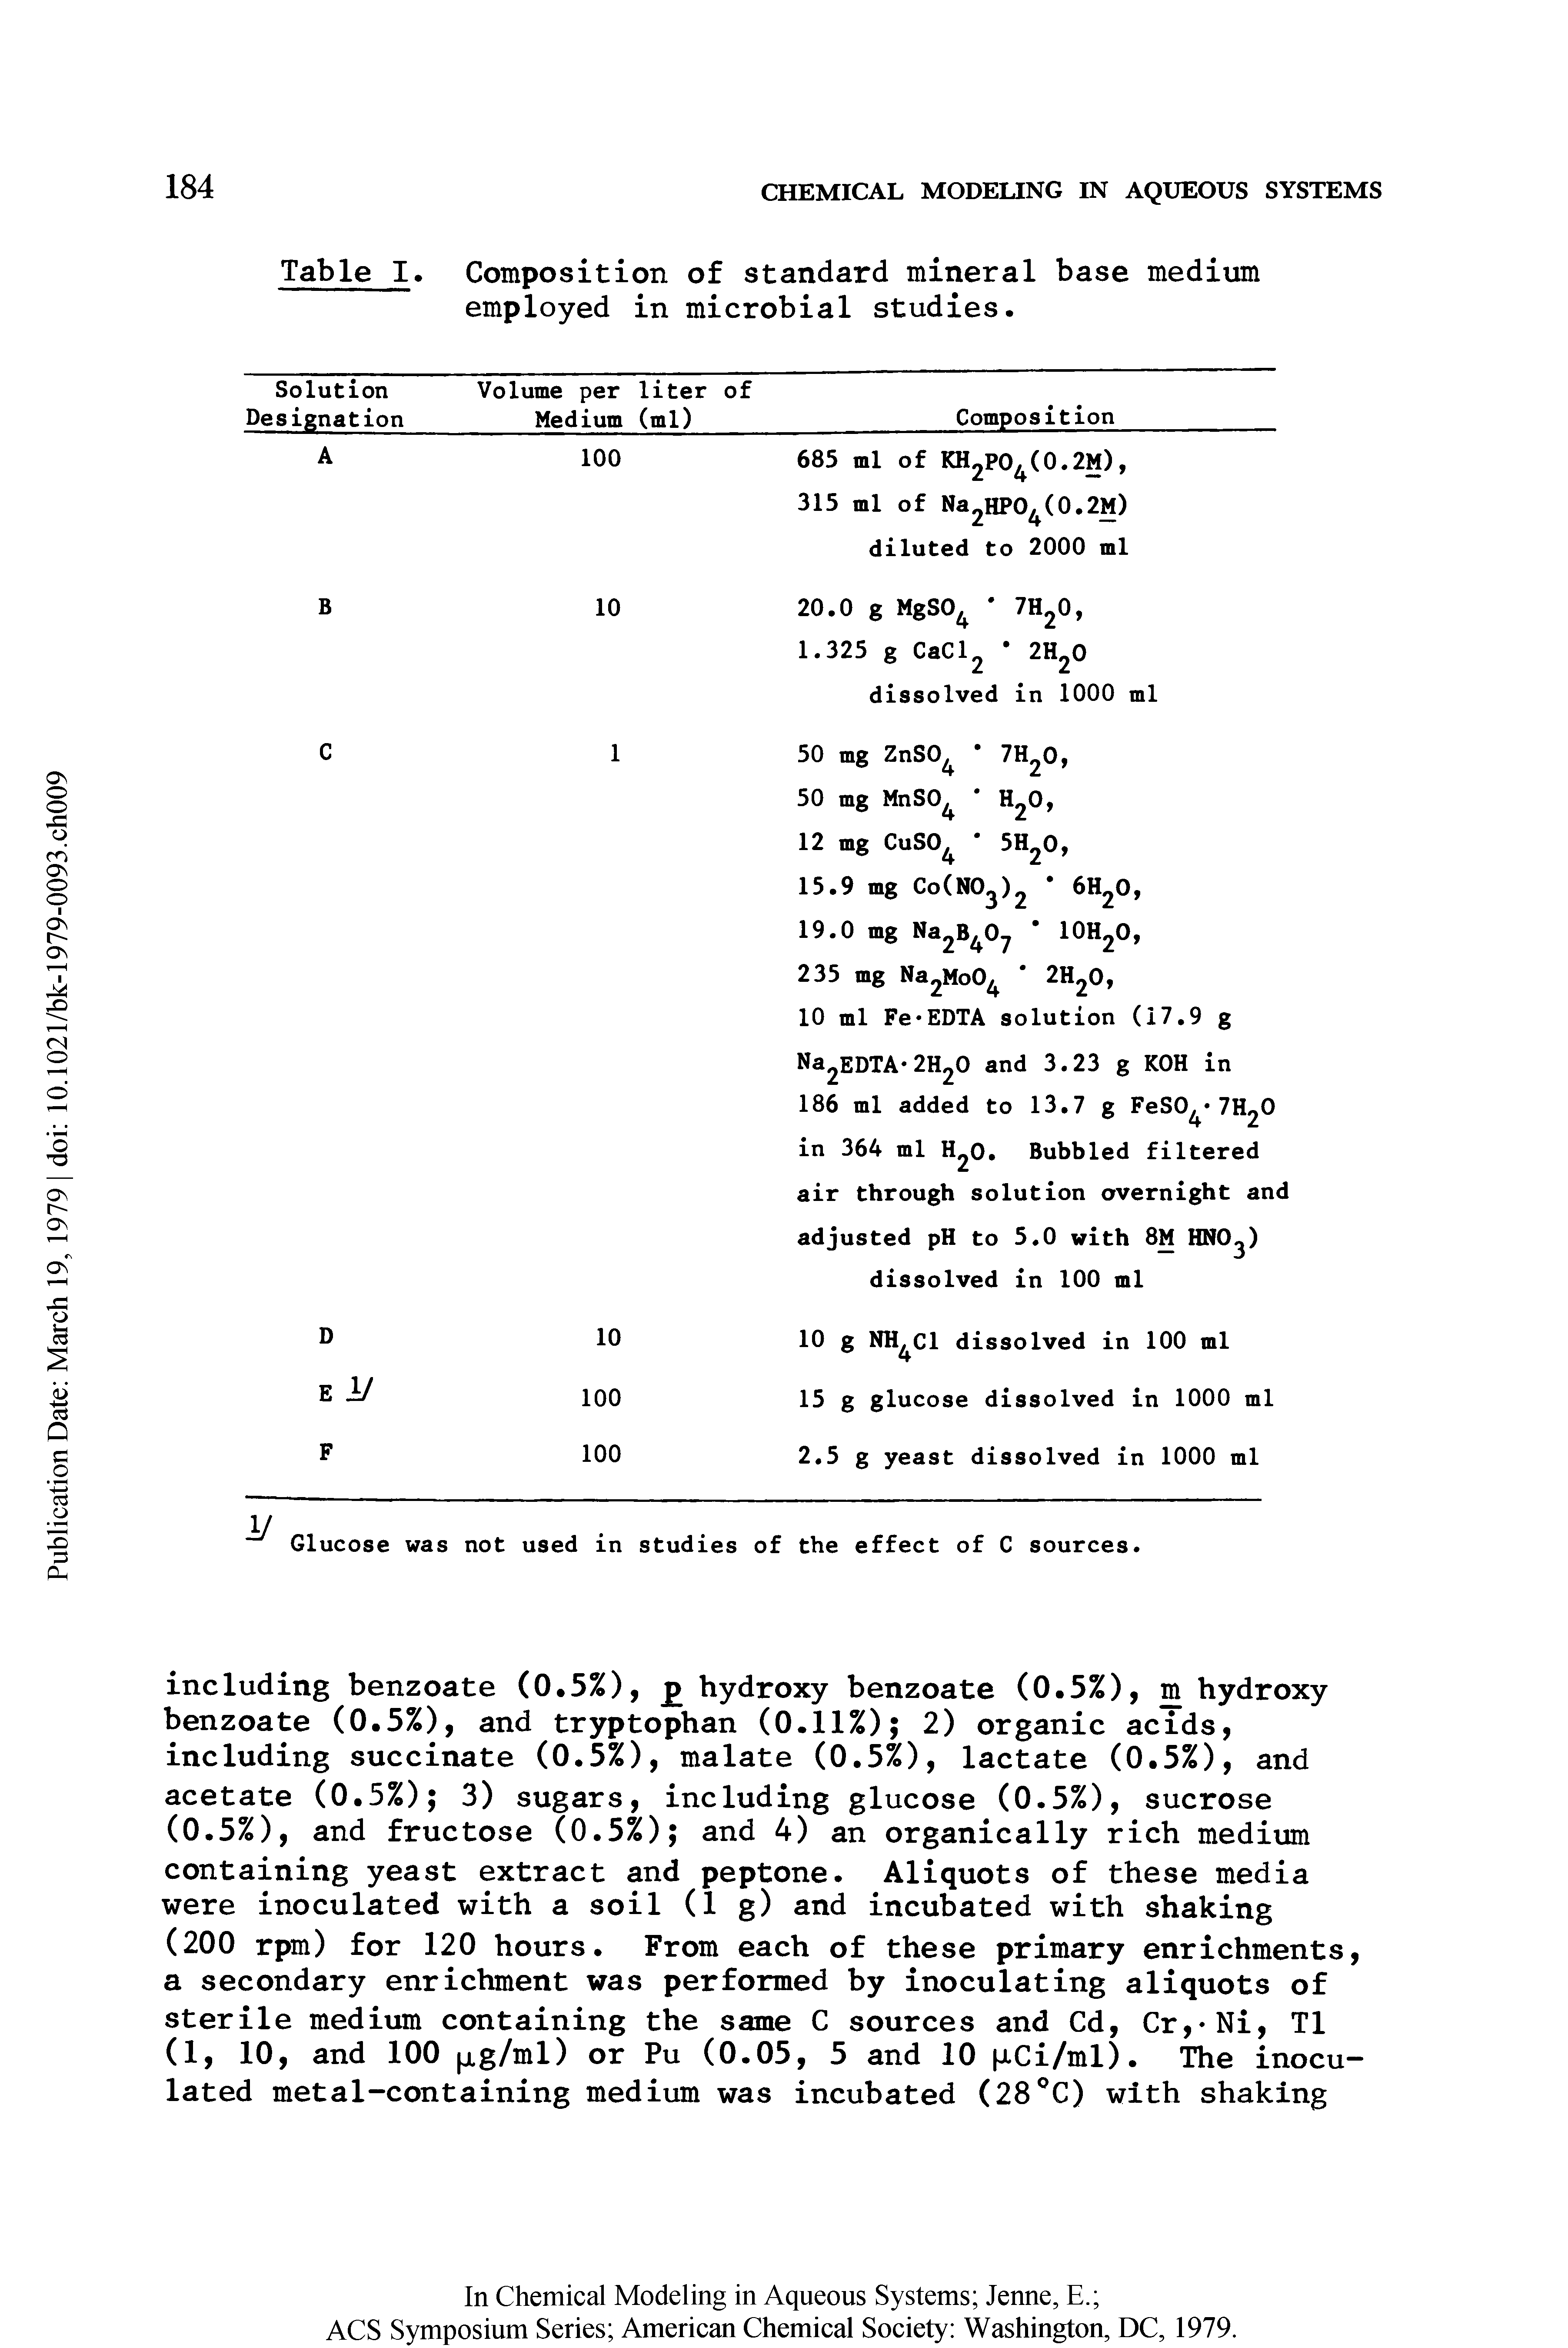 Table I. Composition of standard mineral base medium employed in microbial studies.